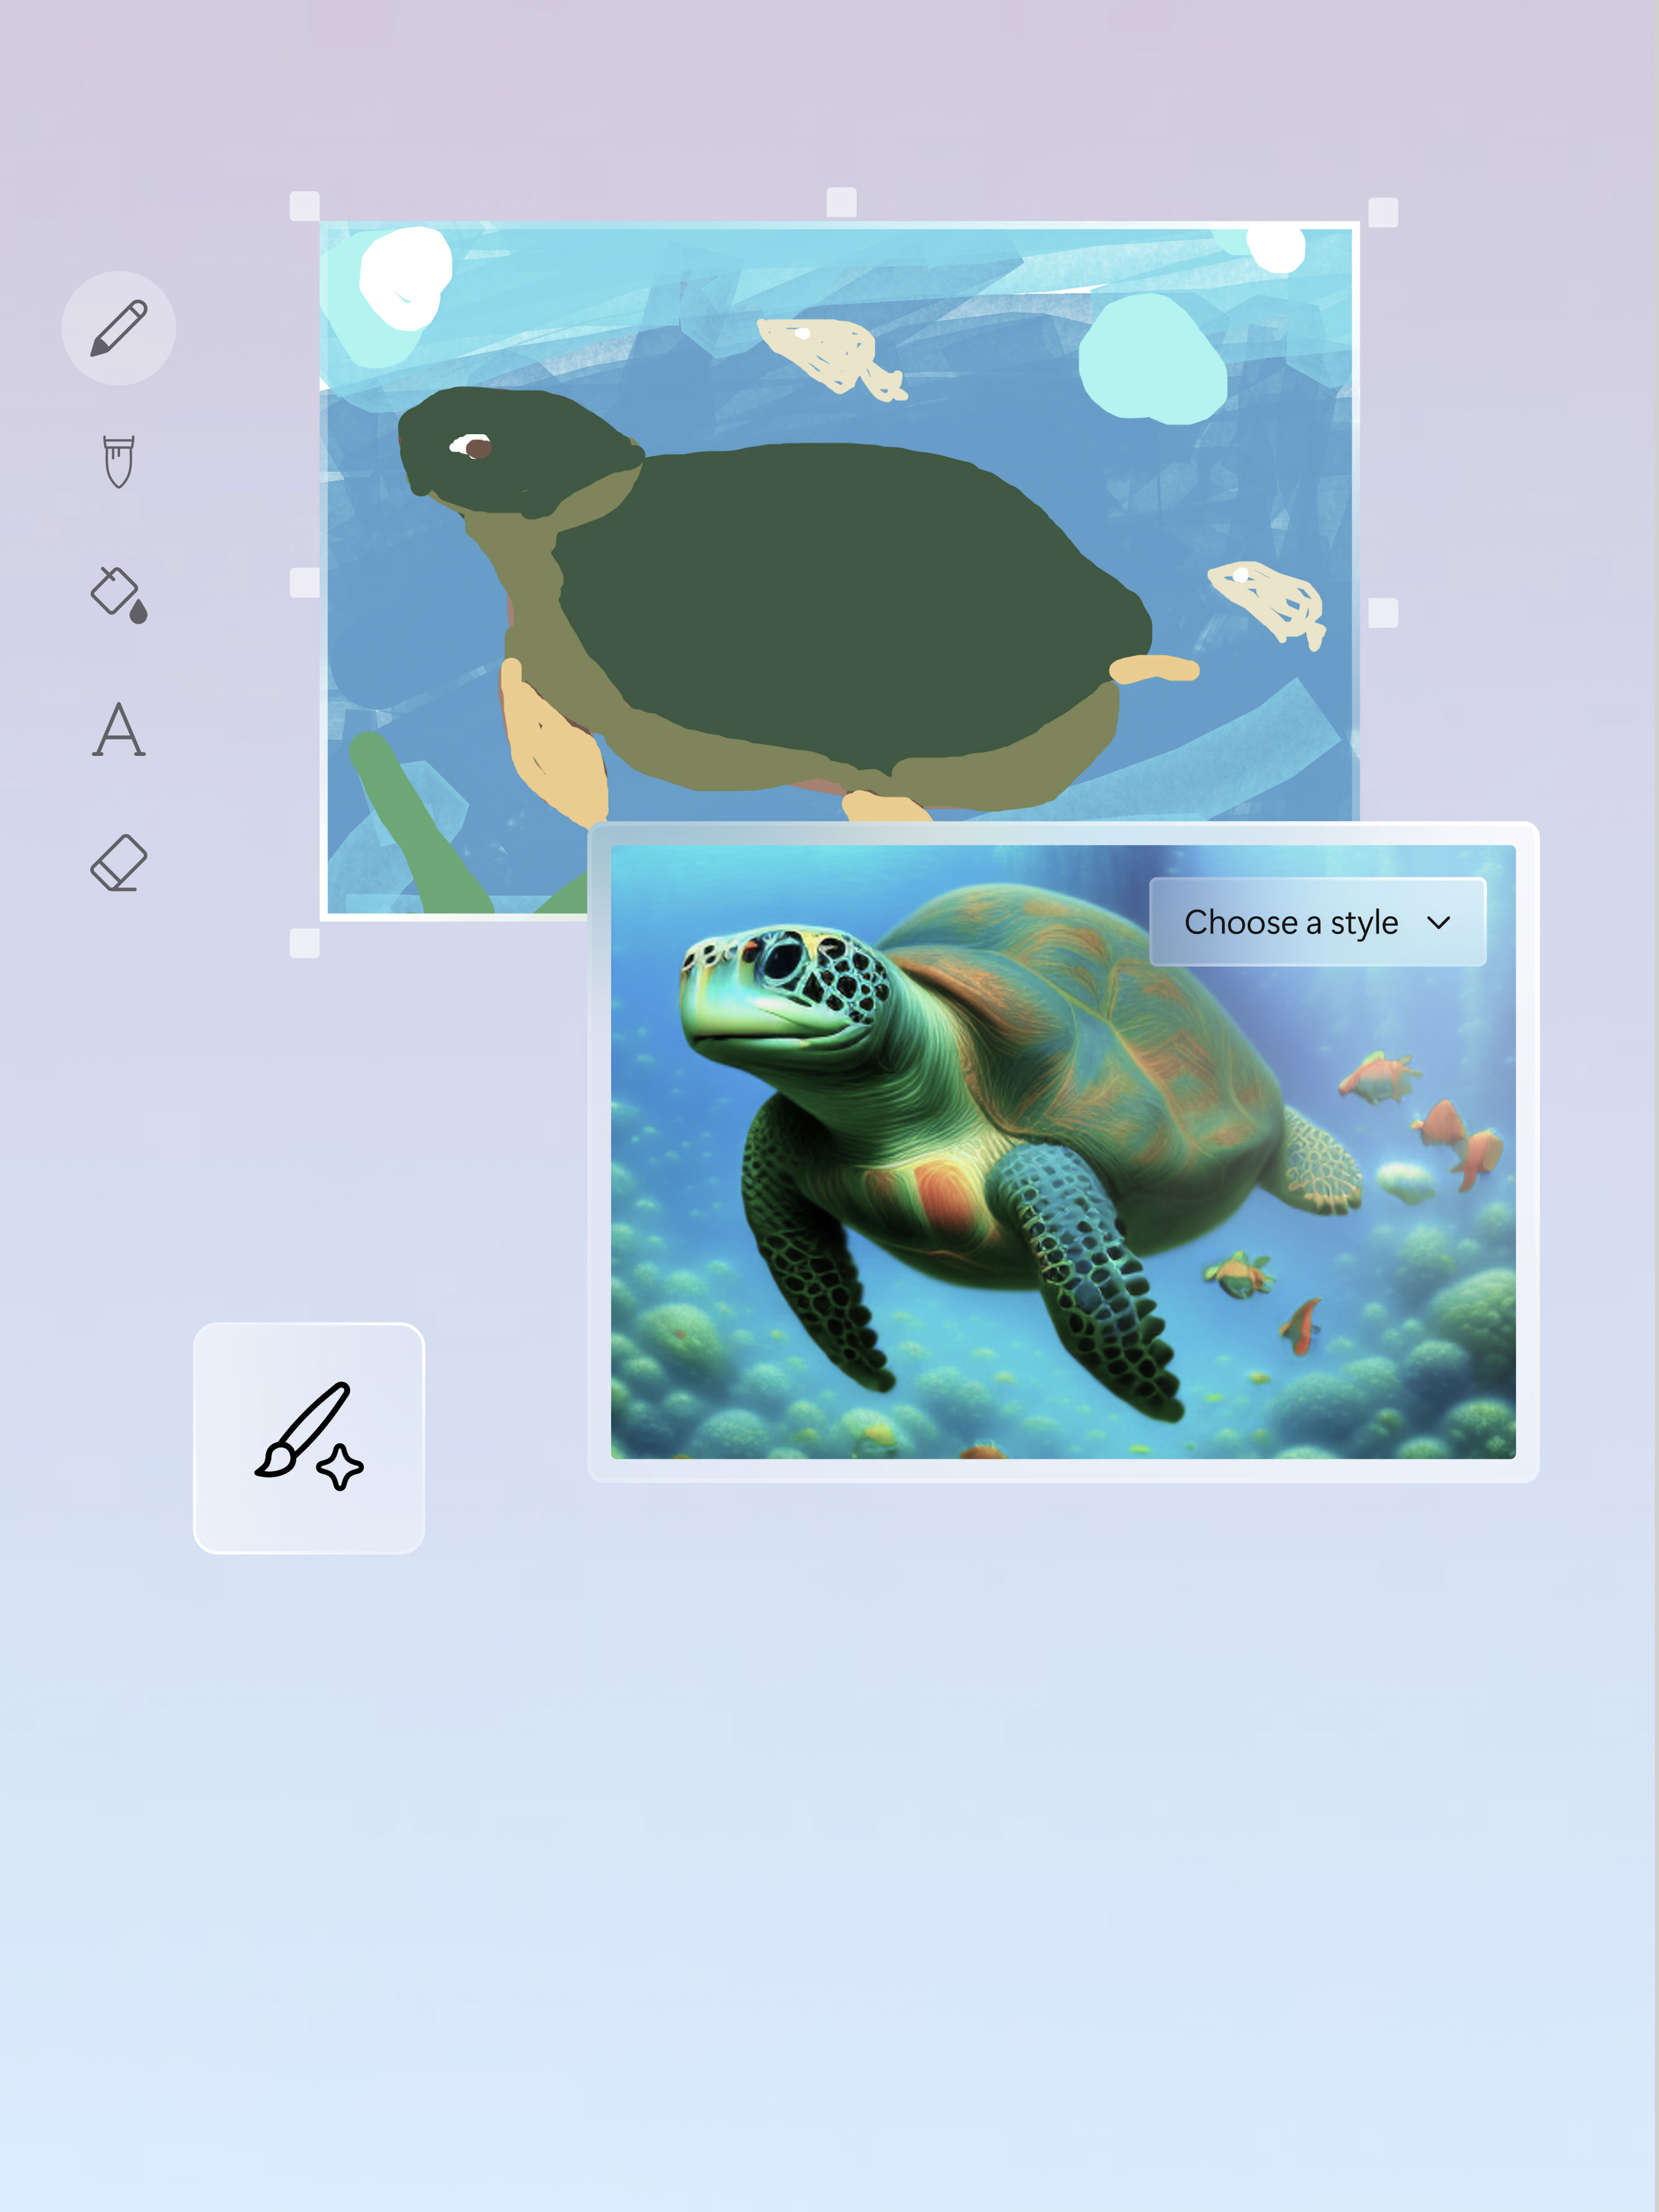 An artist rendering and image of a turtle